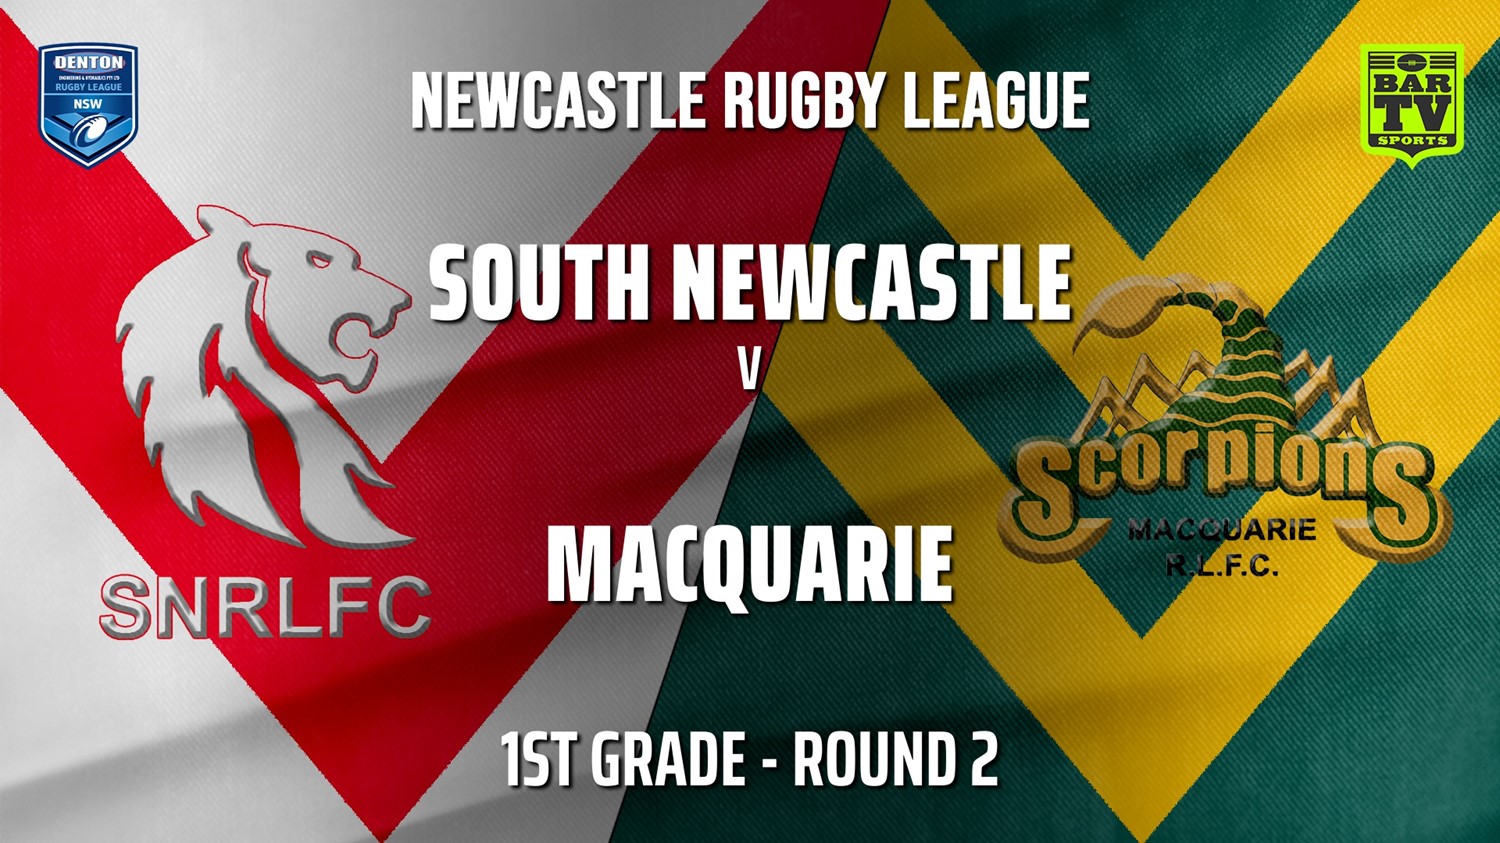 Newcastle Rugby League Round 2 - 1st Grade - South Newcastle v Macquarie Scorpions Slate Image